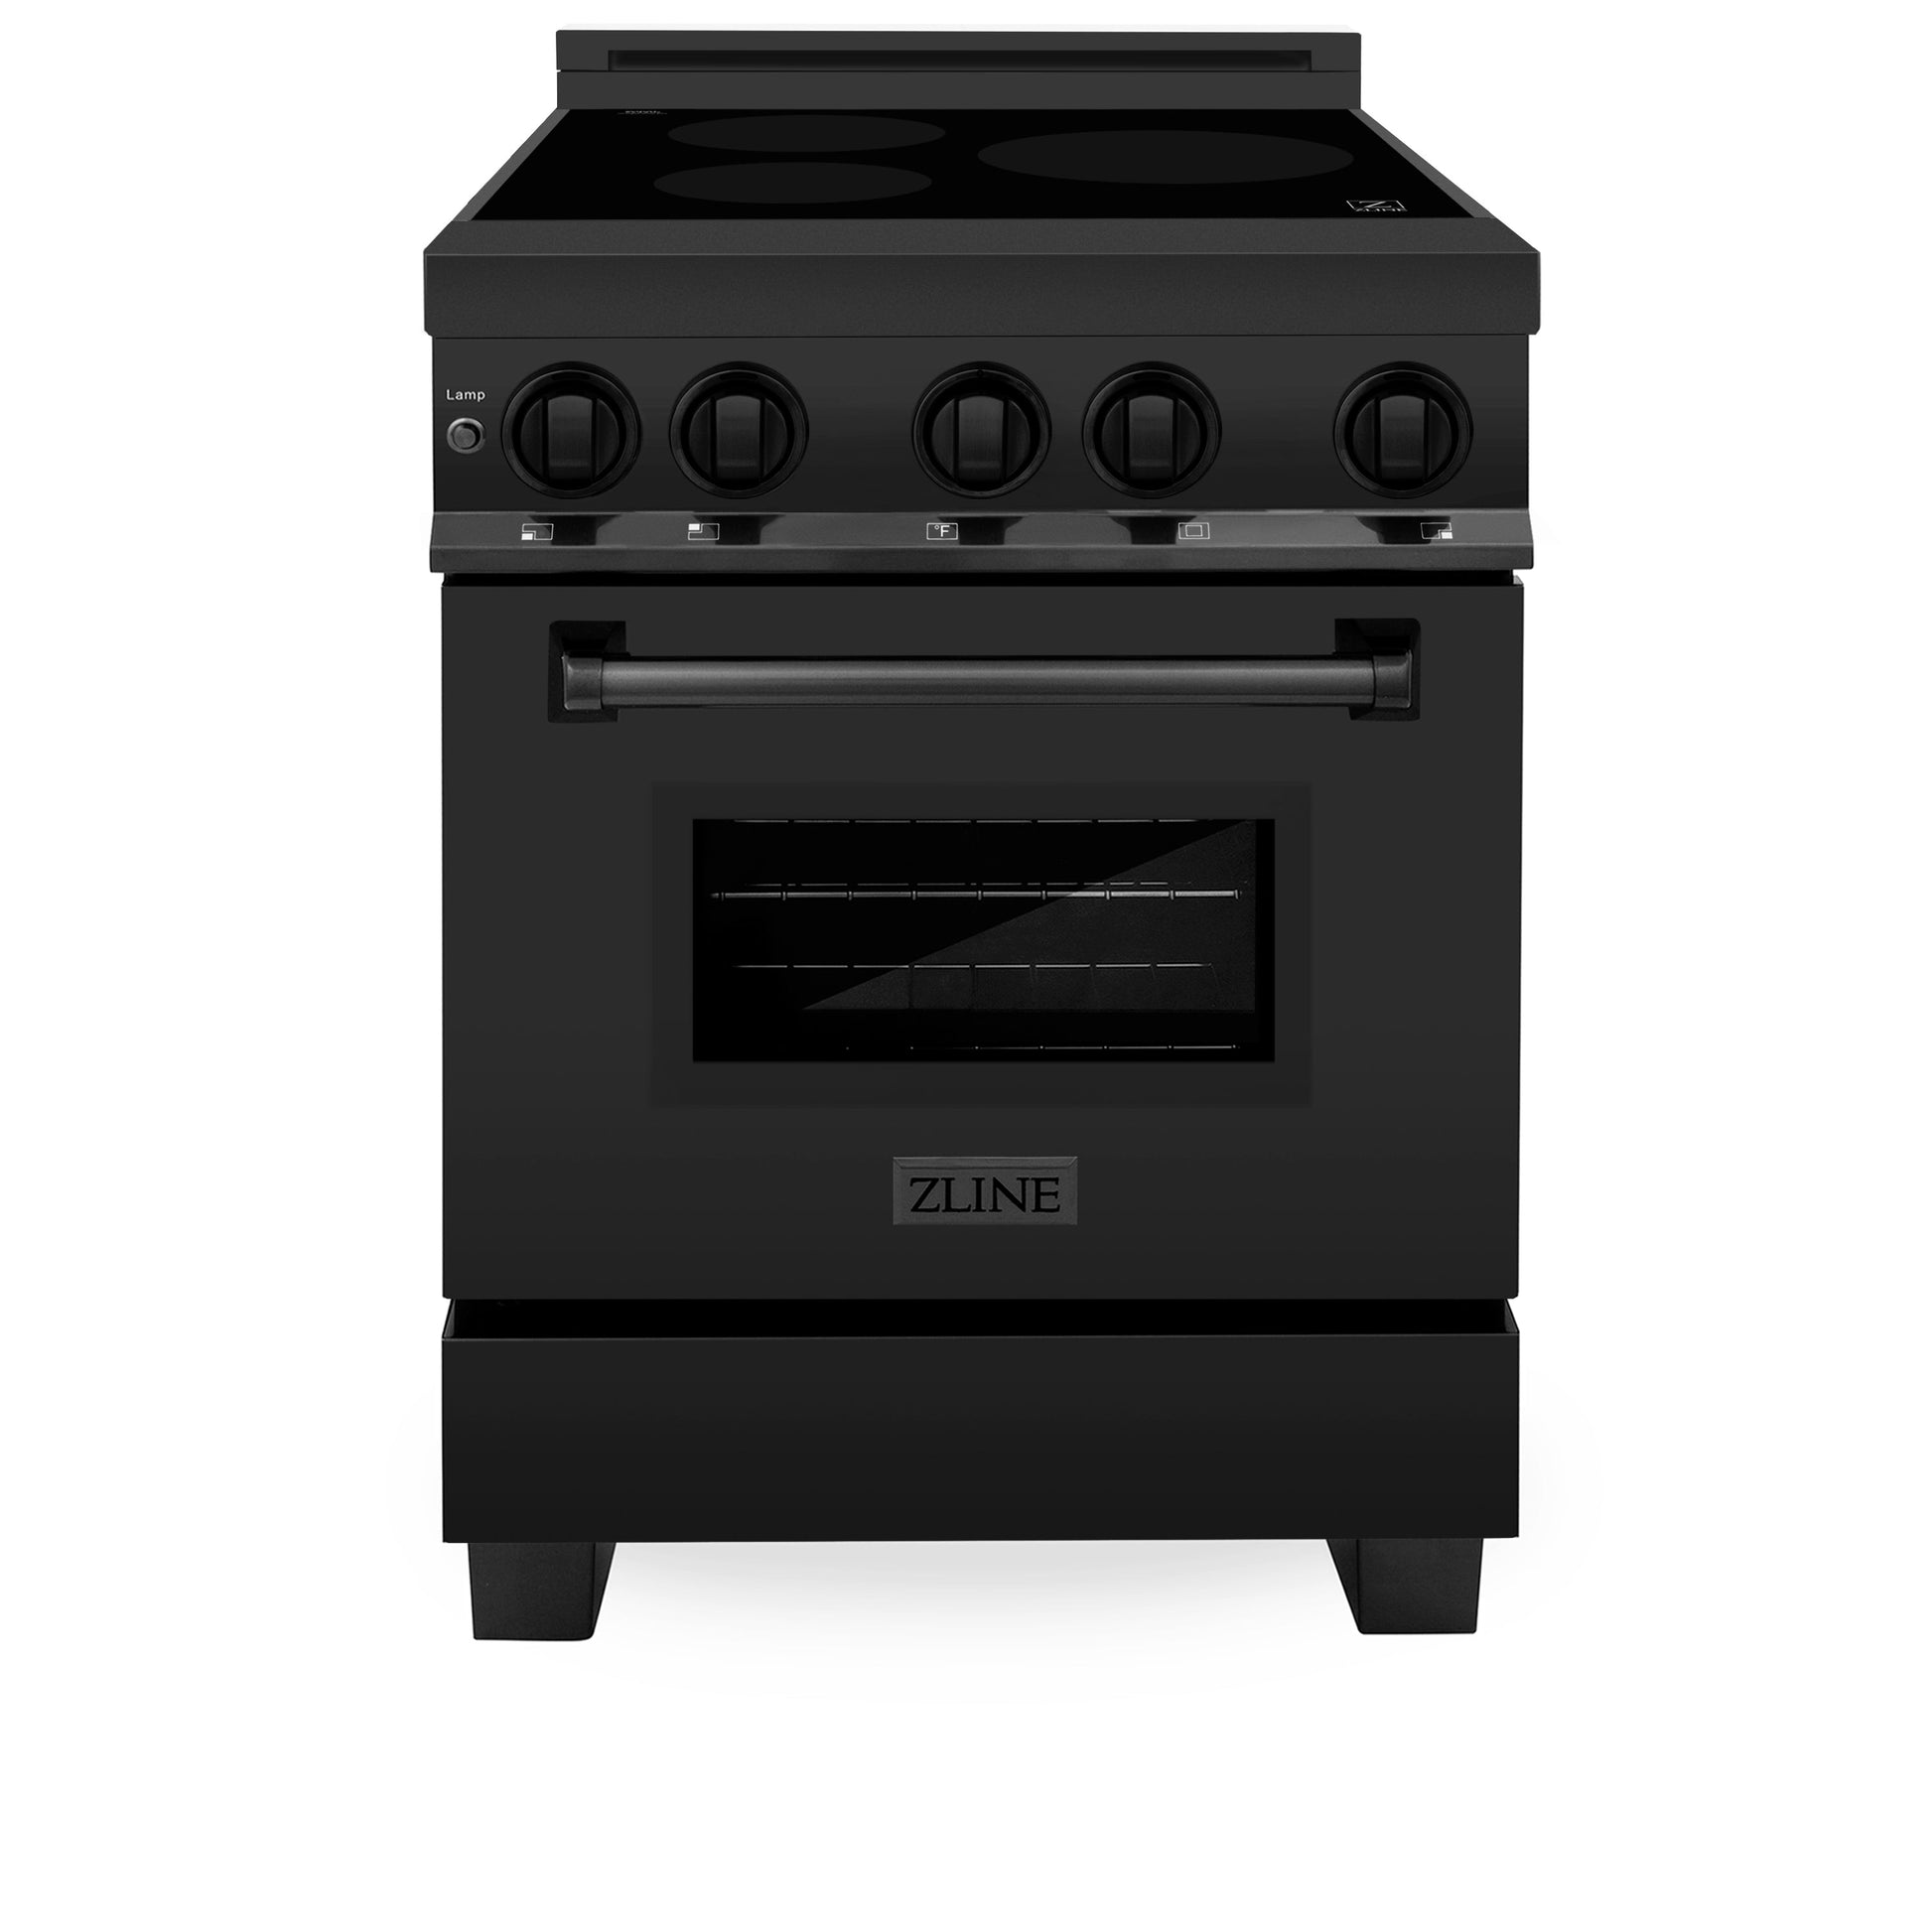 ZLINE Autograph Edition 24" Induction 3 Element Stove Range with Electric Oven - Black Stainless Steel